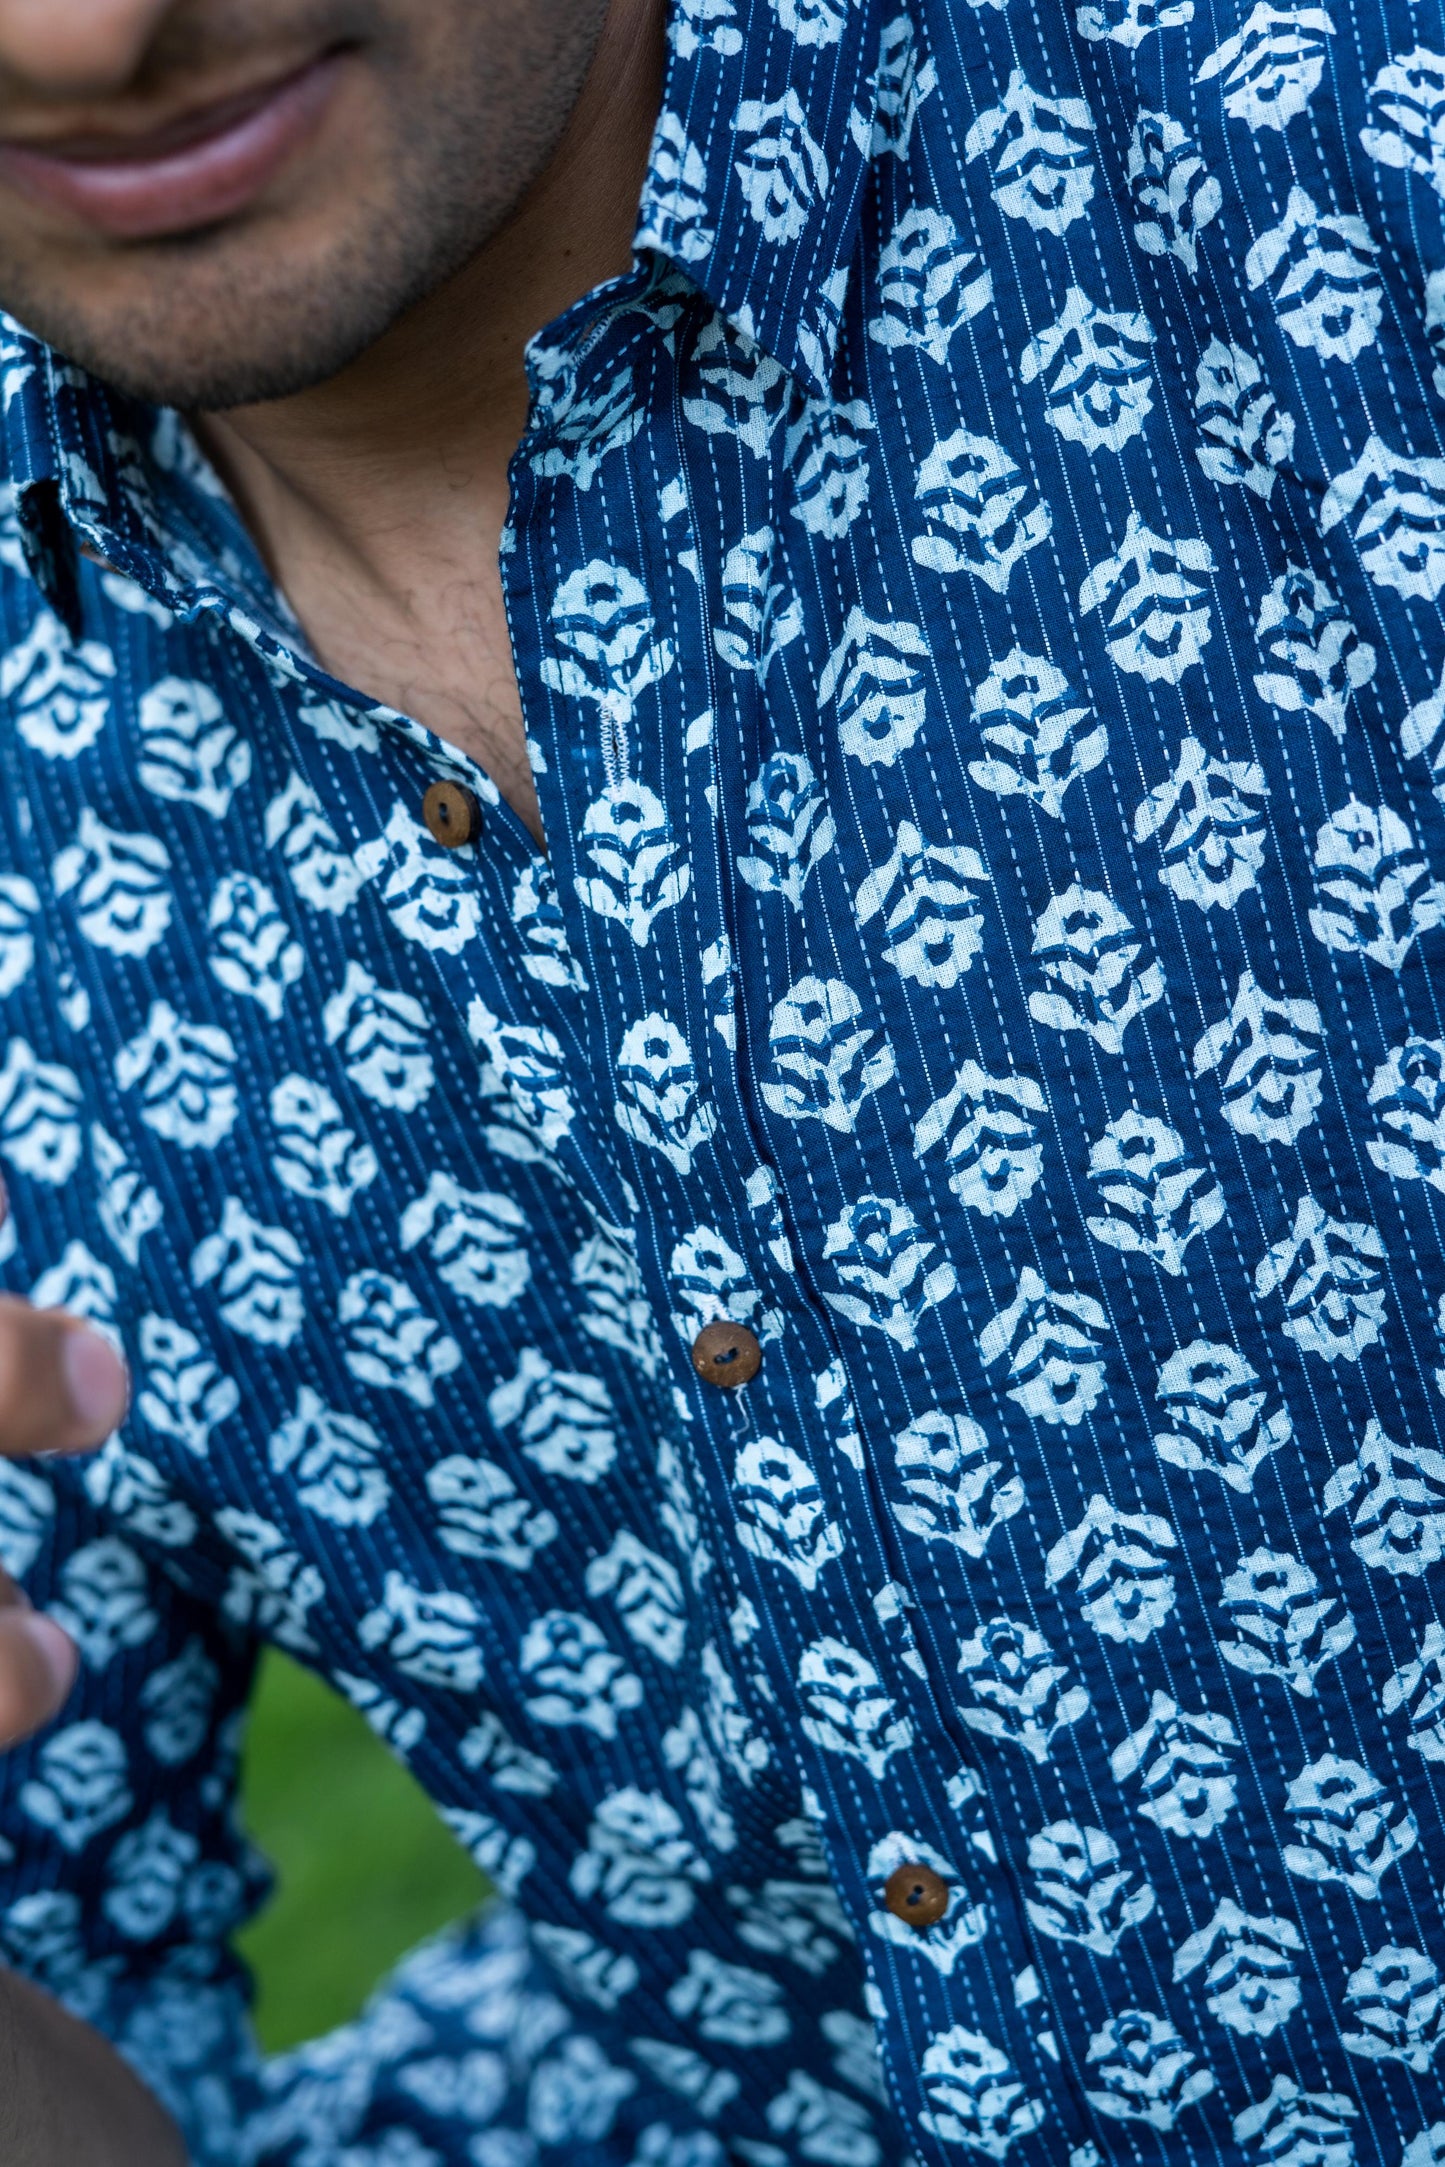 The Navy Blue Kantha Work Shirt With White Butti Print